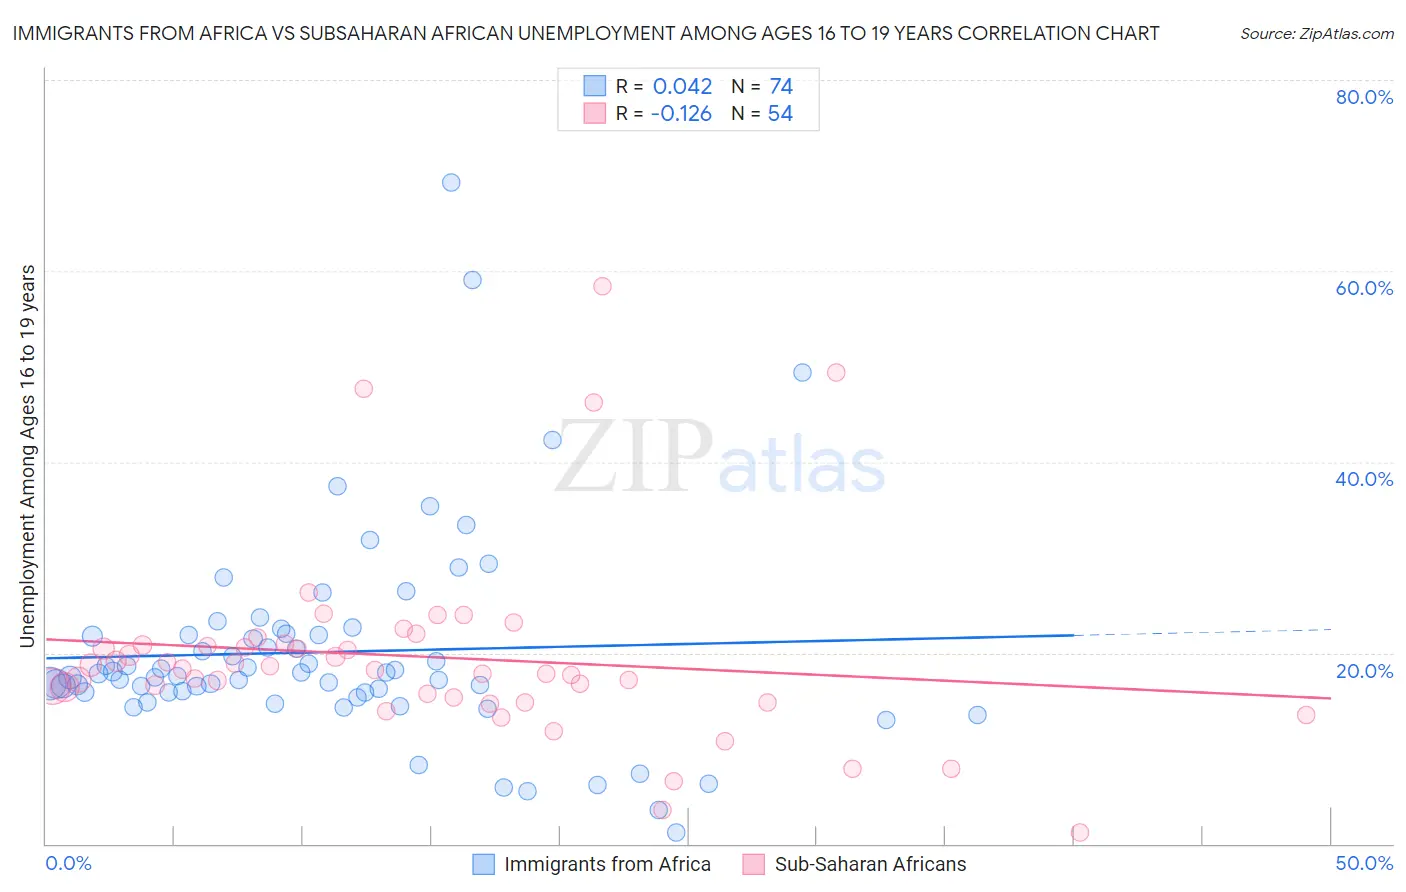 Immigrants from Africa vs Subsaharan African Unemployment Among Ages 16 to 19 years